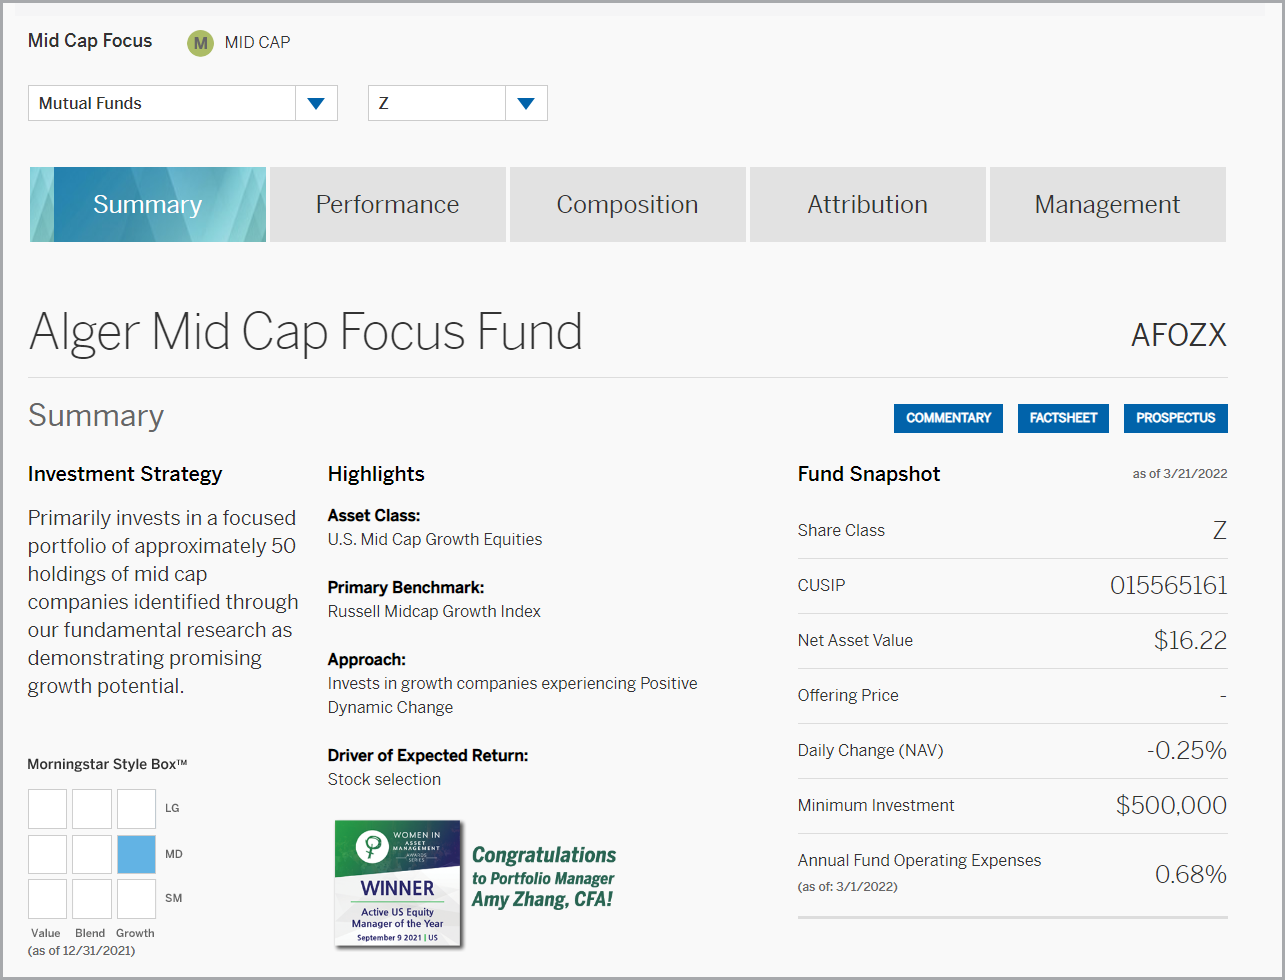 Screenshot of the Mid Cap Focus Fund product page